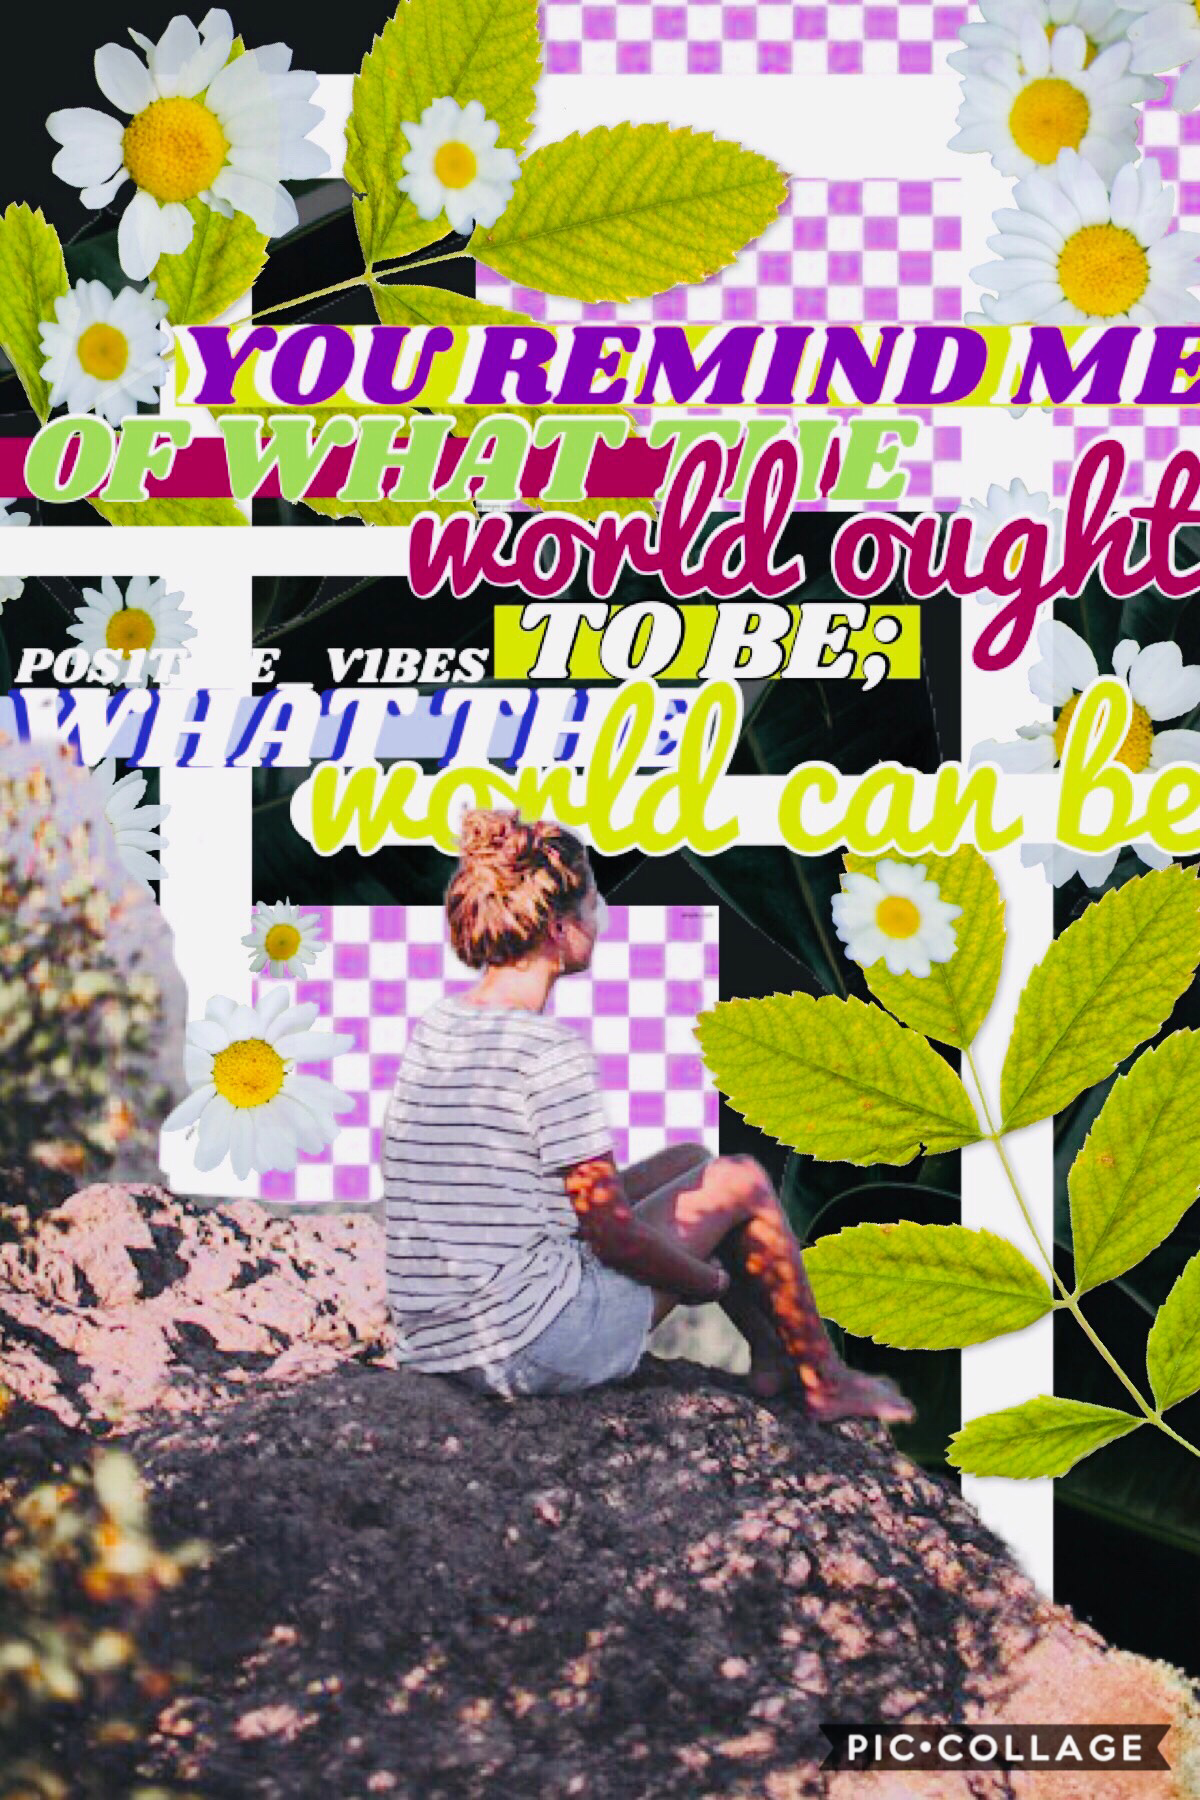 🥗Quote from, “Queen Of Shadows”🥗Excuse this horrible collage, I tried🥗I’m working on my December Monthly bullet journal🥗SALAD ALWAYS🥗I have religious class tomorrow, I know nothing🥗
#PCONLY
#SALADALWAYS
#SALADWINS
#EXCUSETHE
#COLLAGE
#DECEMBERR
#BULLET
#J